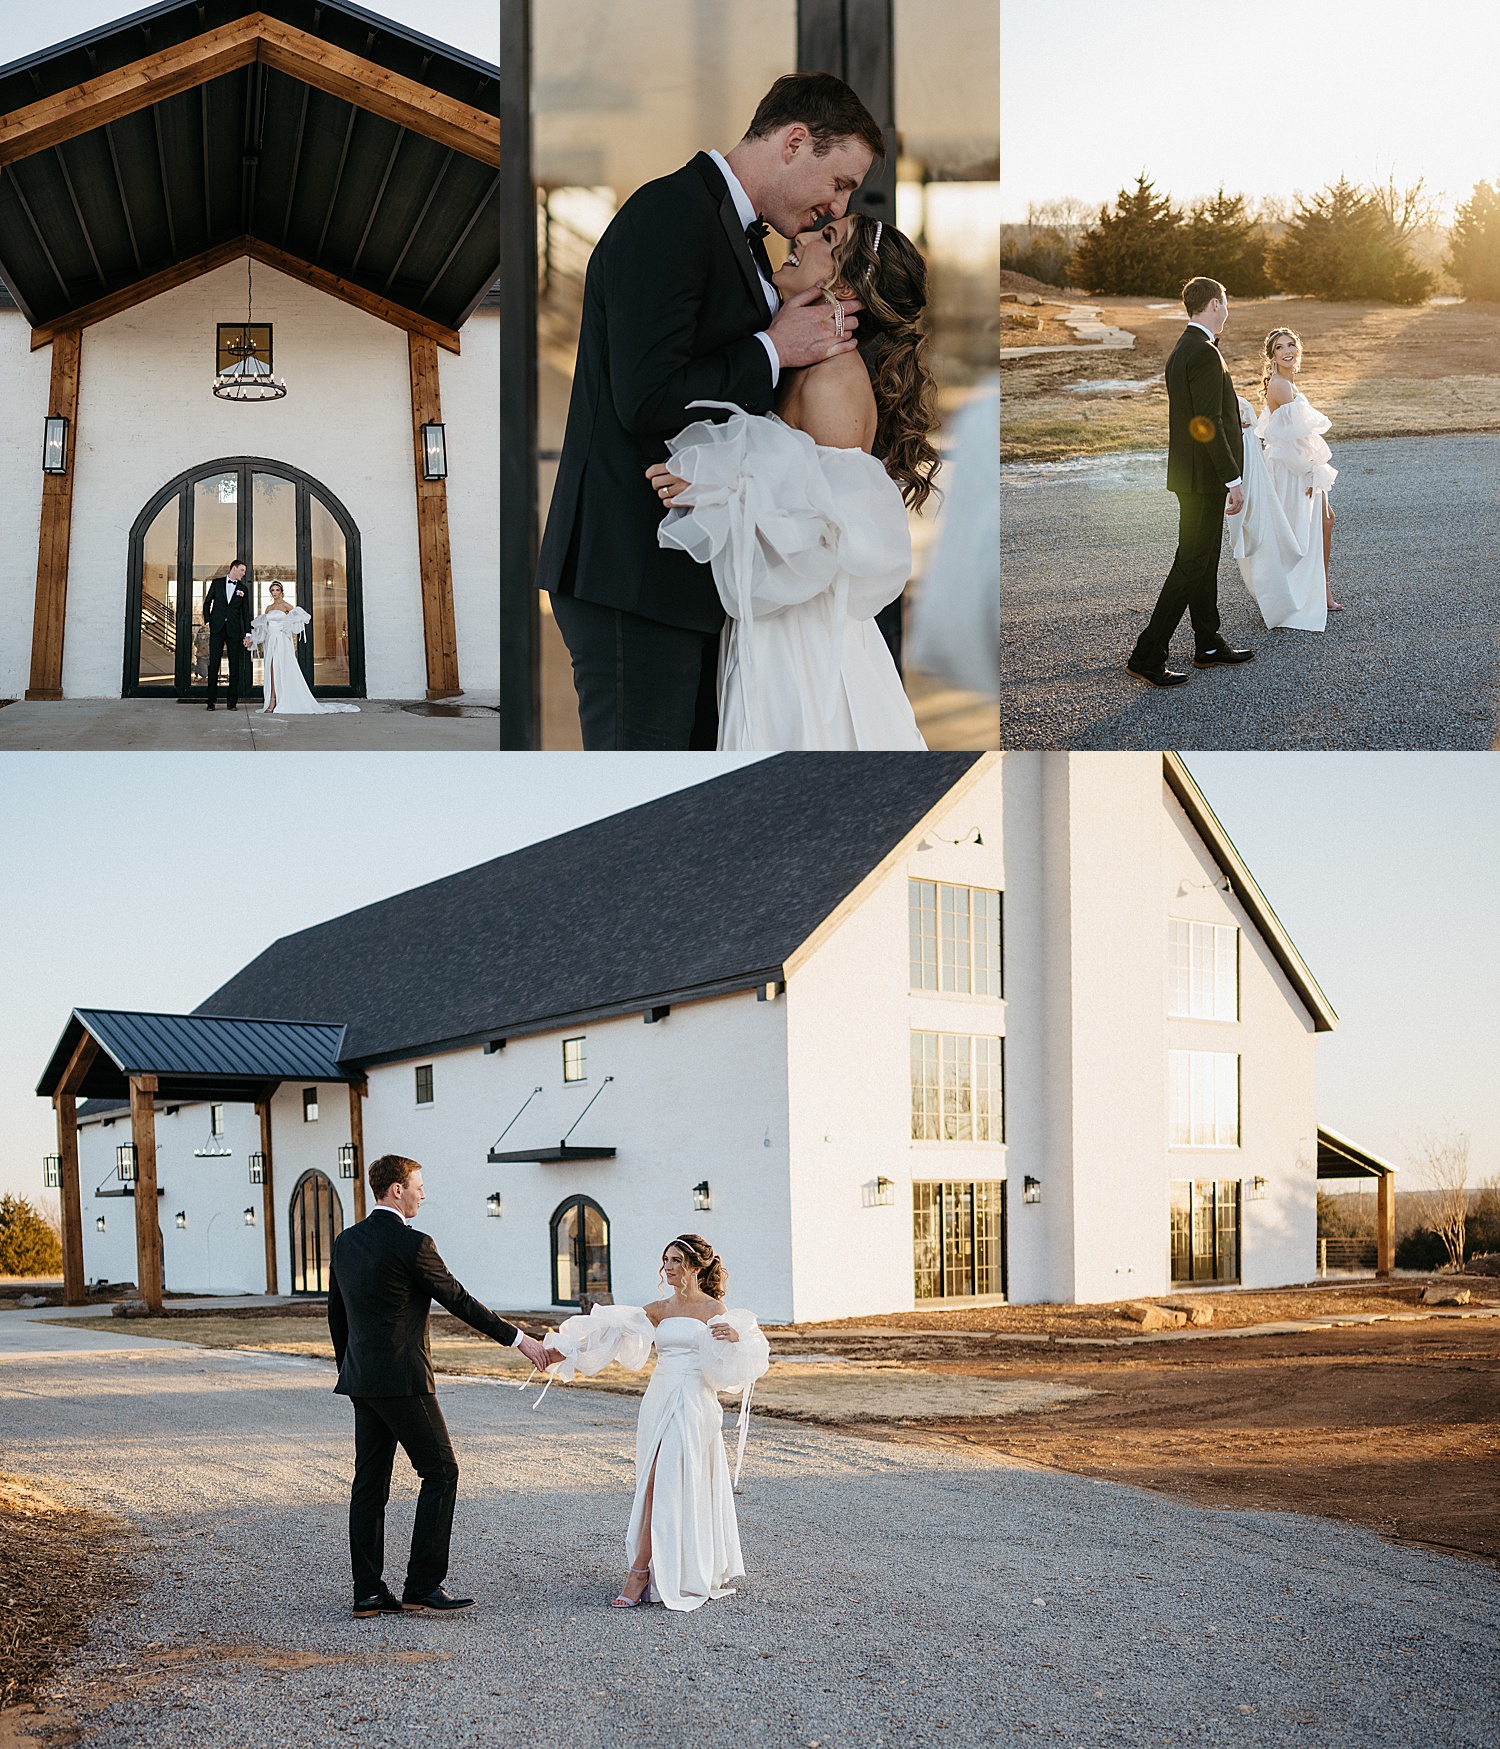 Bride and groom at sunset outside of the range in Stillwater holding hands in driveway